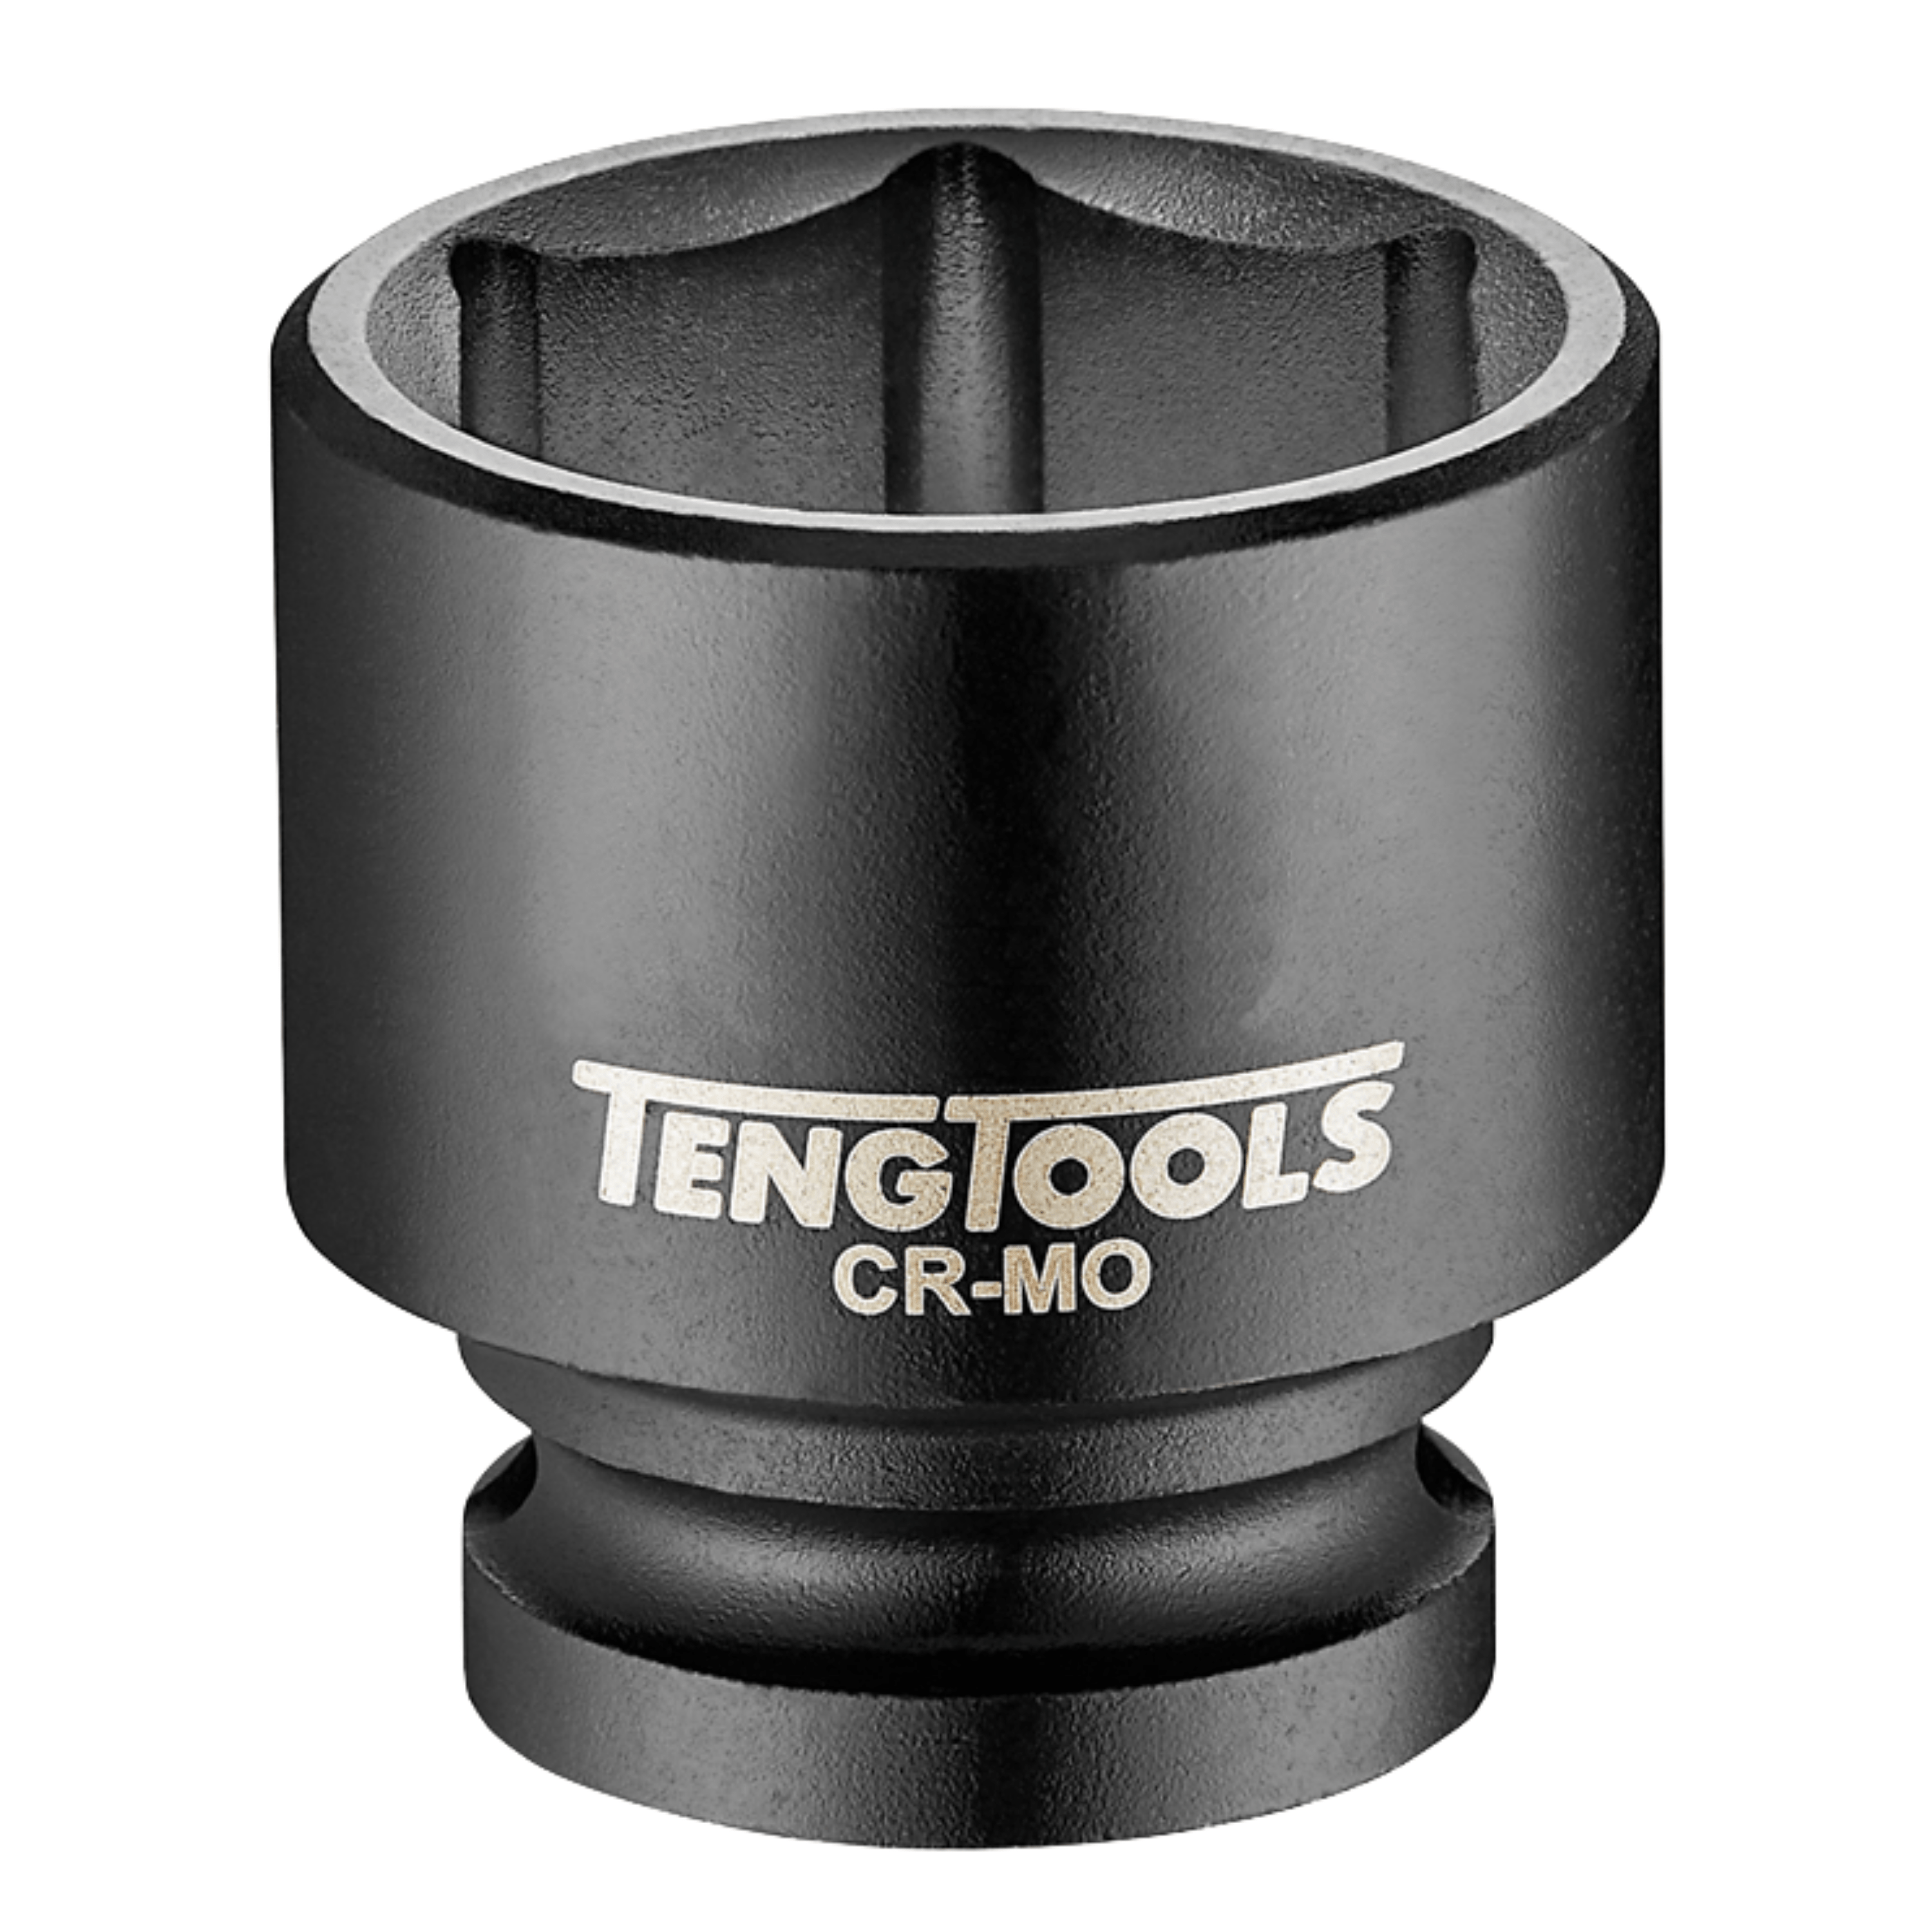 Teng Tools 1-1/2 Inch Drive 6 Point Metric Shallow Chrome Molybdenum Impact Sockets - 60mm